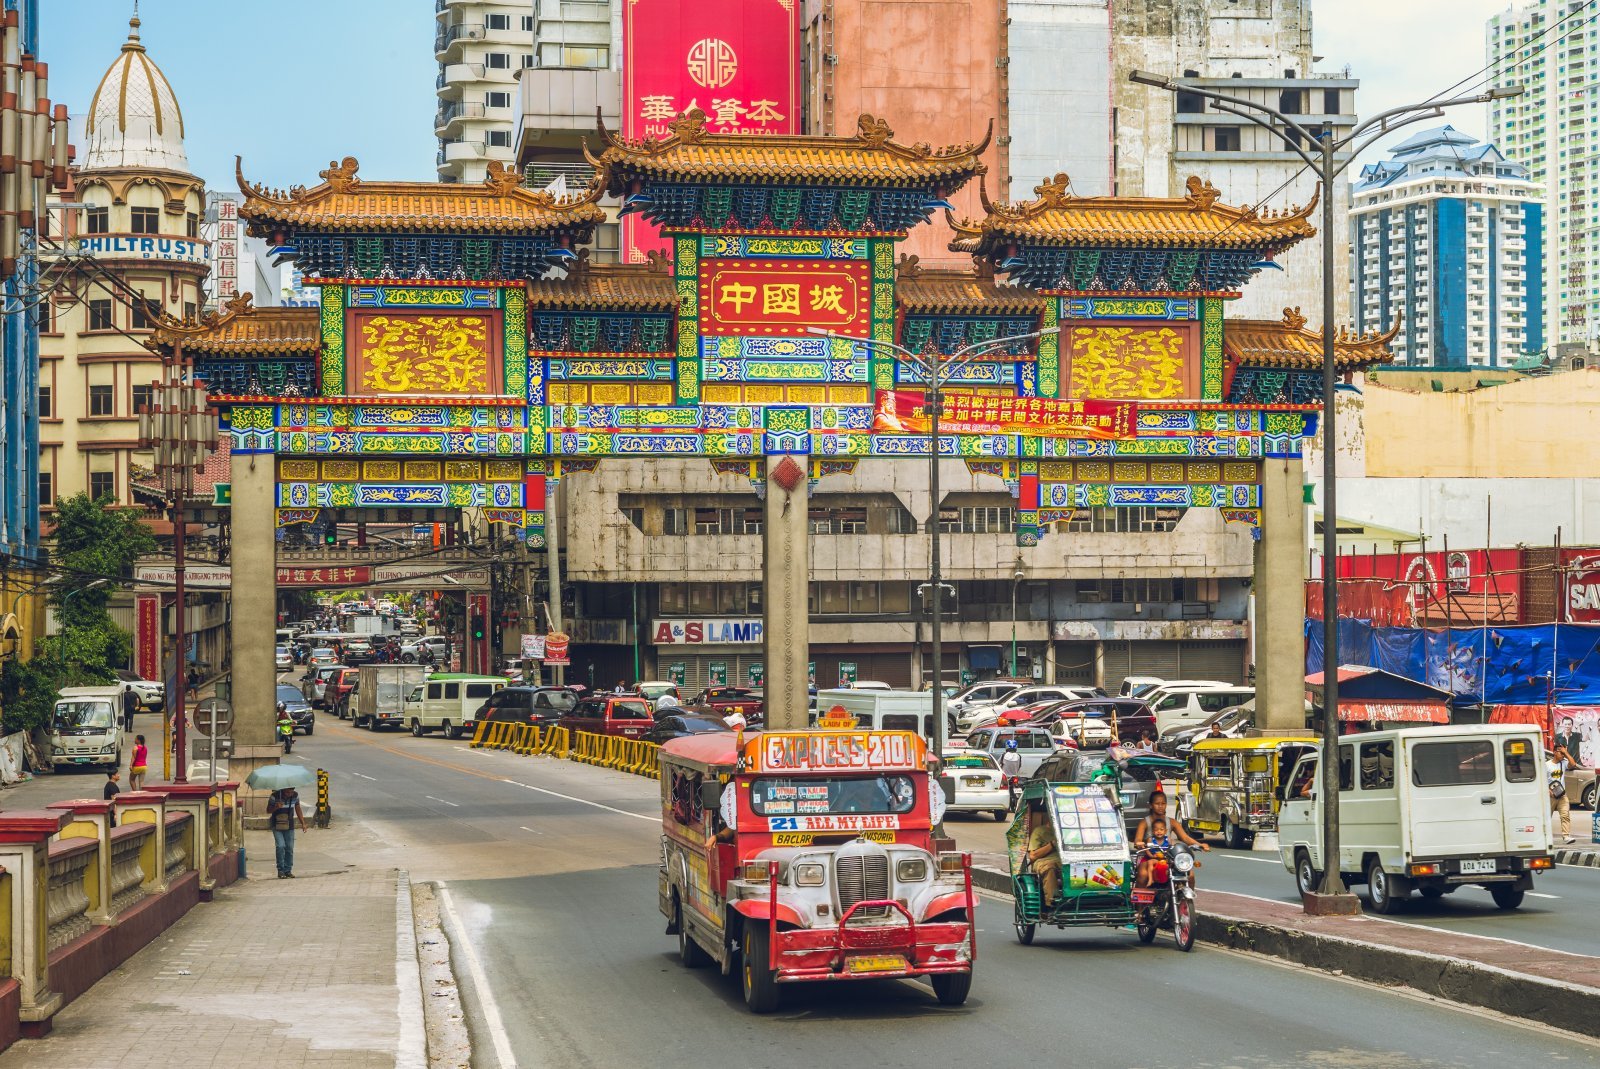 <p class="wp-caption-text">Image Credit: Shutterstock / Richie Chan</p>  <p><span>Binondo, established in 1594, is recognized as the world’s oldest Chinatown, located in the heart of Manila, Philippines. The Spanish founded this historic district as a settlement for Catholic Chinese, and it has since evolved into a vibrant commercial and cultural hub, reflecting a rich blend of Filipino and Chinese influences. Binondo’s intricate network of streets and alleys teems with shops, restaurants, and vendors, offering an array of goods from traditional Chinese medicine to gold jewelry and various culinary delights.</span></p> <p><span>The area is renowned for its unique culinary scene, where traditional Chinese cuisine meets Filipino flavors, resulting in a diverse gastronomic experience. Notable food destinations include Ongpin Street, known for its authentic Chinese restaurants and bakeries serving delicacies such as dim sum, noodles, and hopia. With its distinctive octagonal bell tower, the Binondo Church highlights the district’s historical and religious significance, serving the spiritual needs of its predominantly Chinese Catholic community.</span></p> <p><span>Binondo’s economic activity centers mainly on family-owned businesses and trade, contributing significantly to Manila’s economy. The district’s narrow streets are lined with various shops and stalls, offering everything from textiles to hardware, showcasing the entrepreneurial spirit of its residents.</span></p> <p><span>In recent years, Binondo has experienced a resurgence of interest as a cultural and tourist destination. Efforts to preserve its historical landmarks and revitalize its streets have attracted locals and tourists to explore its rich heritage and traditions. Walking tours, cultural festivals, and the annual Chinese New Year celebration highlight Binondo’s vibrant community life and its role as a living museum of Filipino-Chinese history.</span></p> <p><b>My Insider’s Tip: </b><span>Venture beyond the main streets and explore Binondo’s side alleys. Here, you’ll find hidden culinary gems and traditional shops serving loyal customers for generations.</span></p>